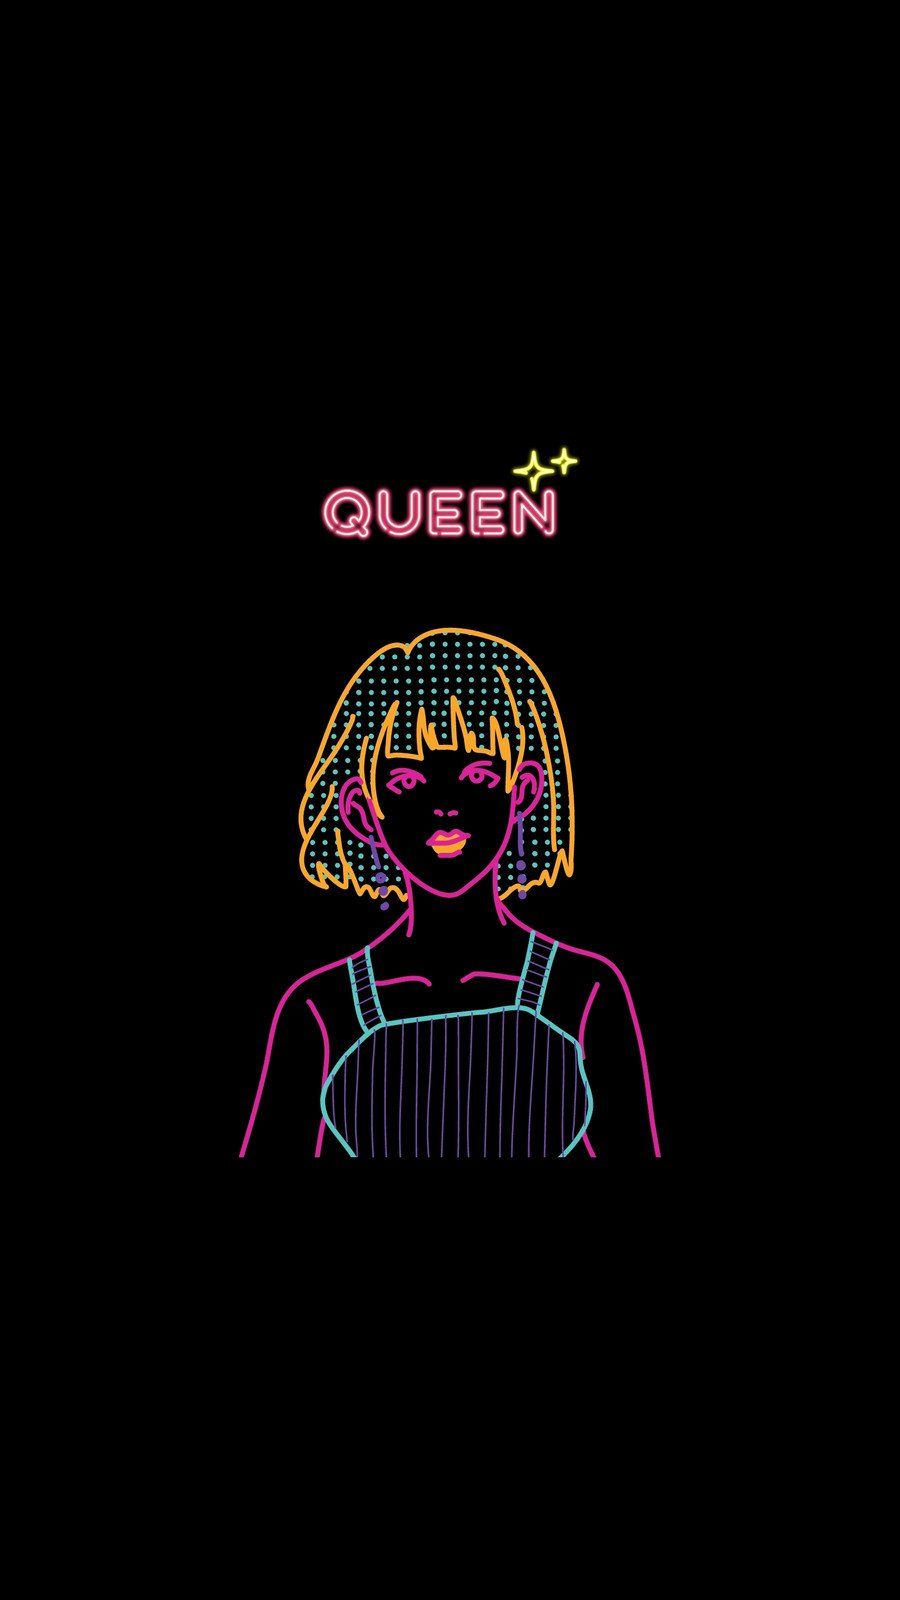 Aesthetic neon art of a woman with the word queen above her - 